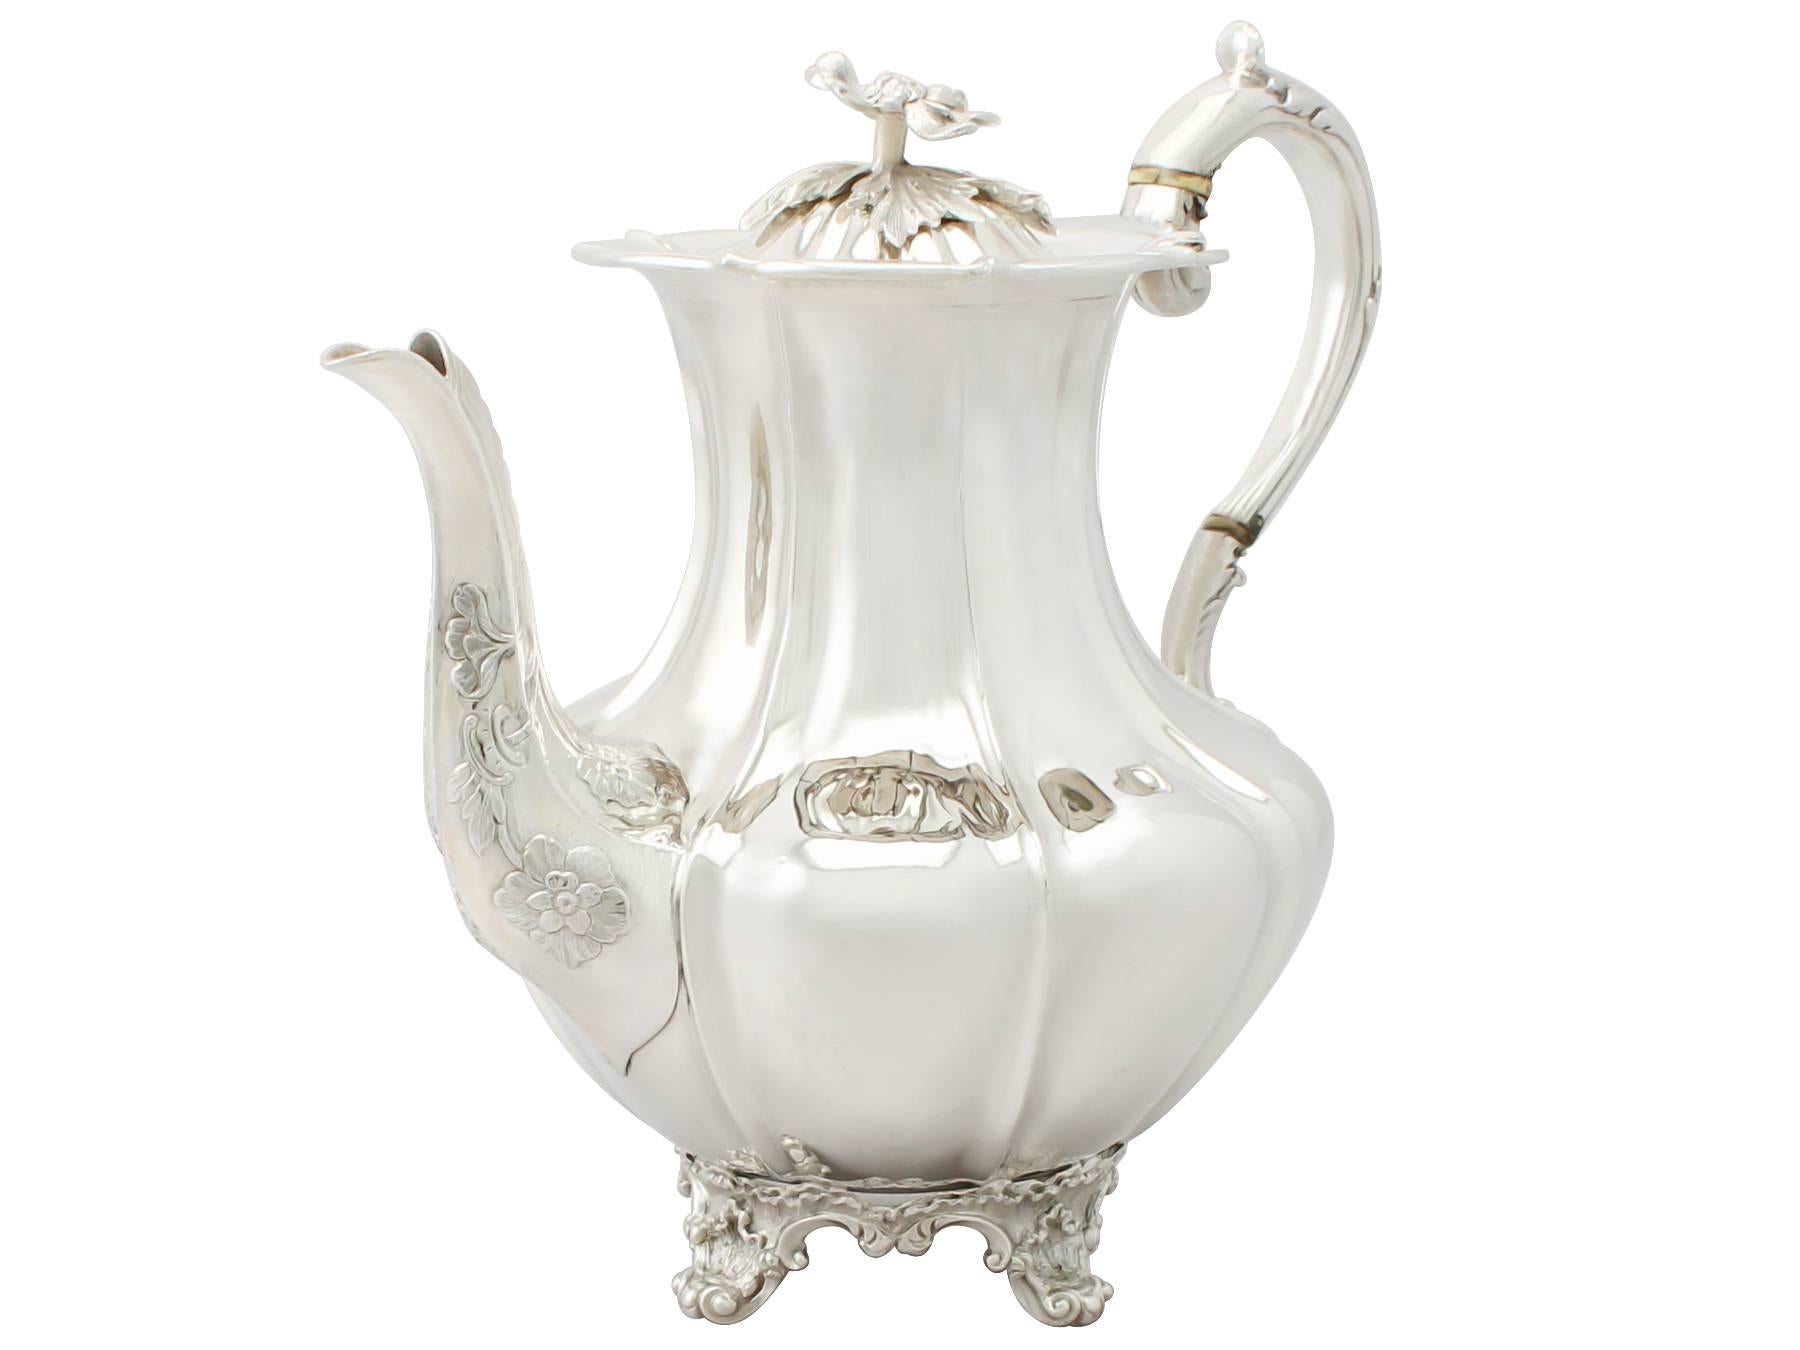 An exceptional, fine and impressive antique English sterling silver melon style four-piece tea and coffee service / set; part of our silver teaware collection.

This exceptional antique English sterling silver tea and coffee service consists of a